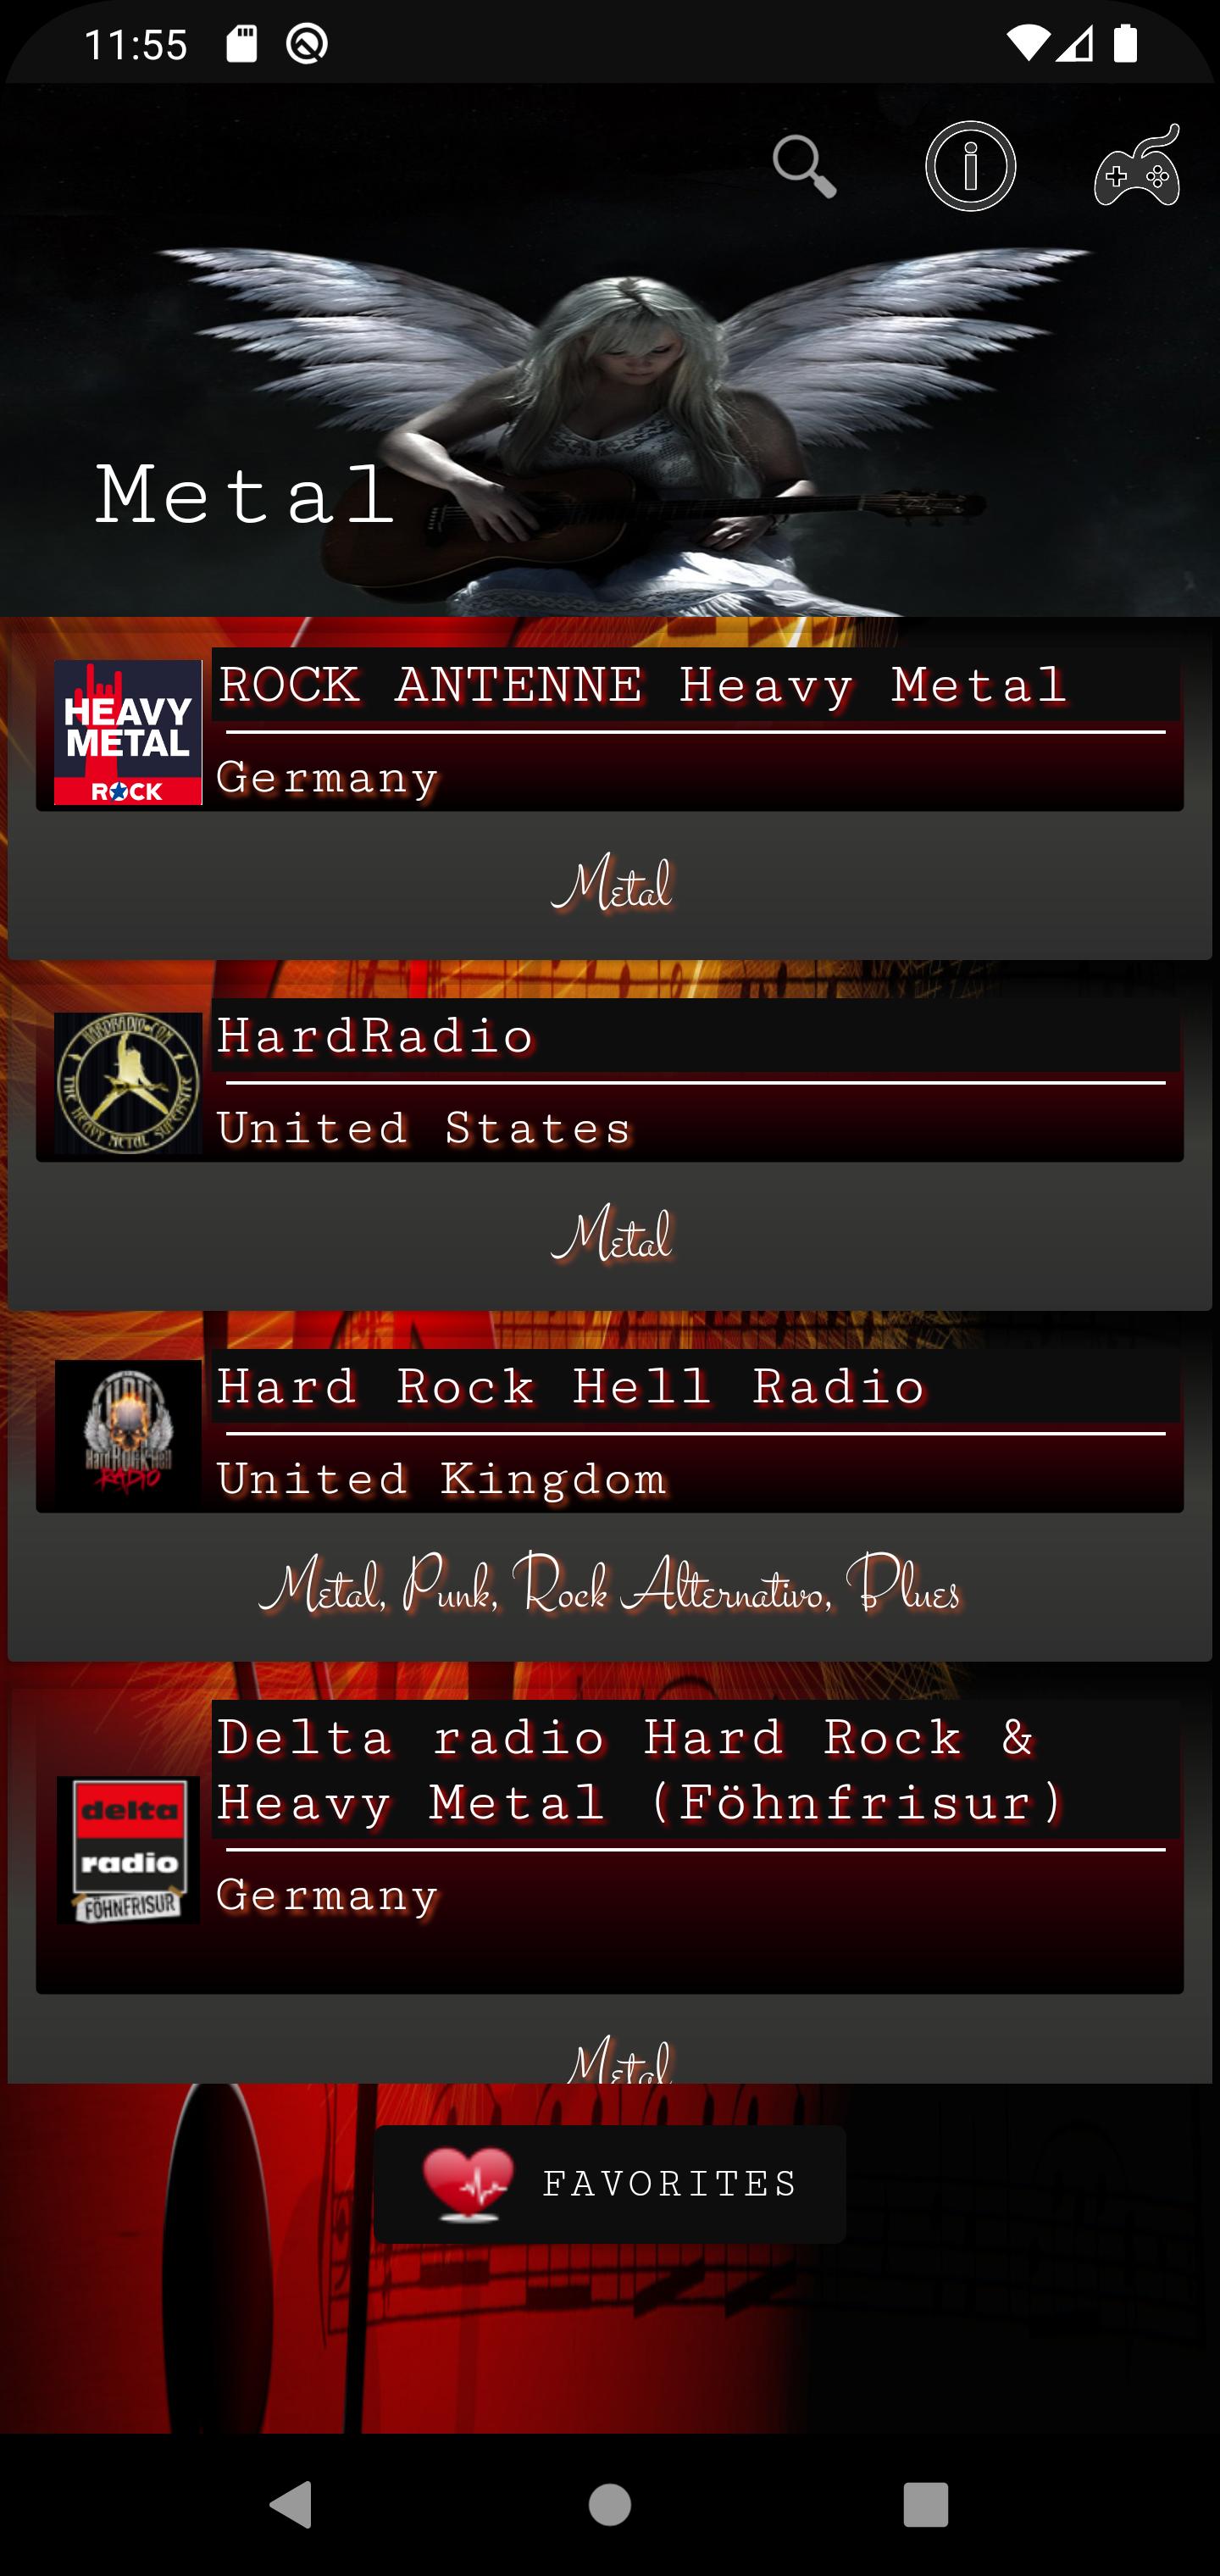 Radio rock, classic metal punk APK for Android Download